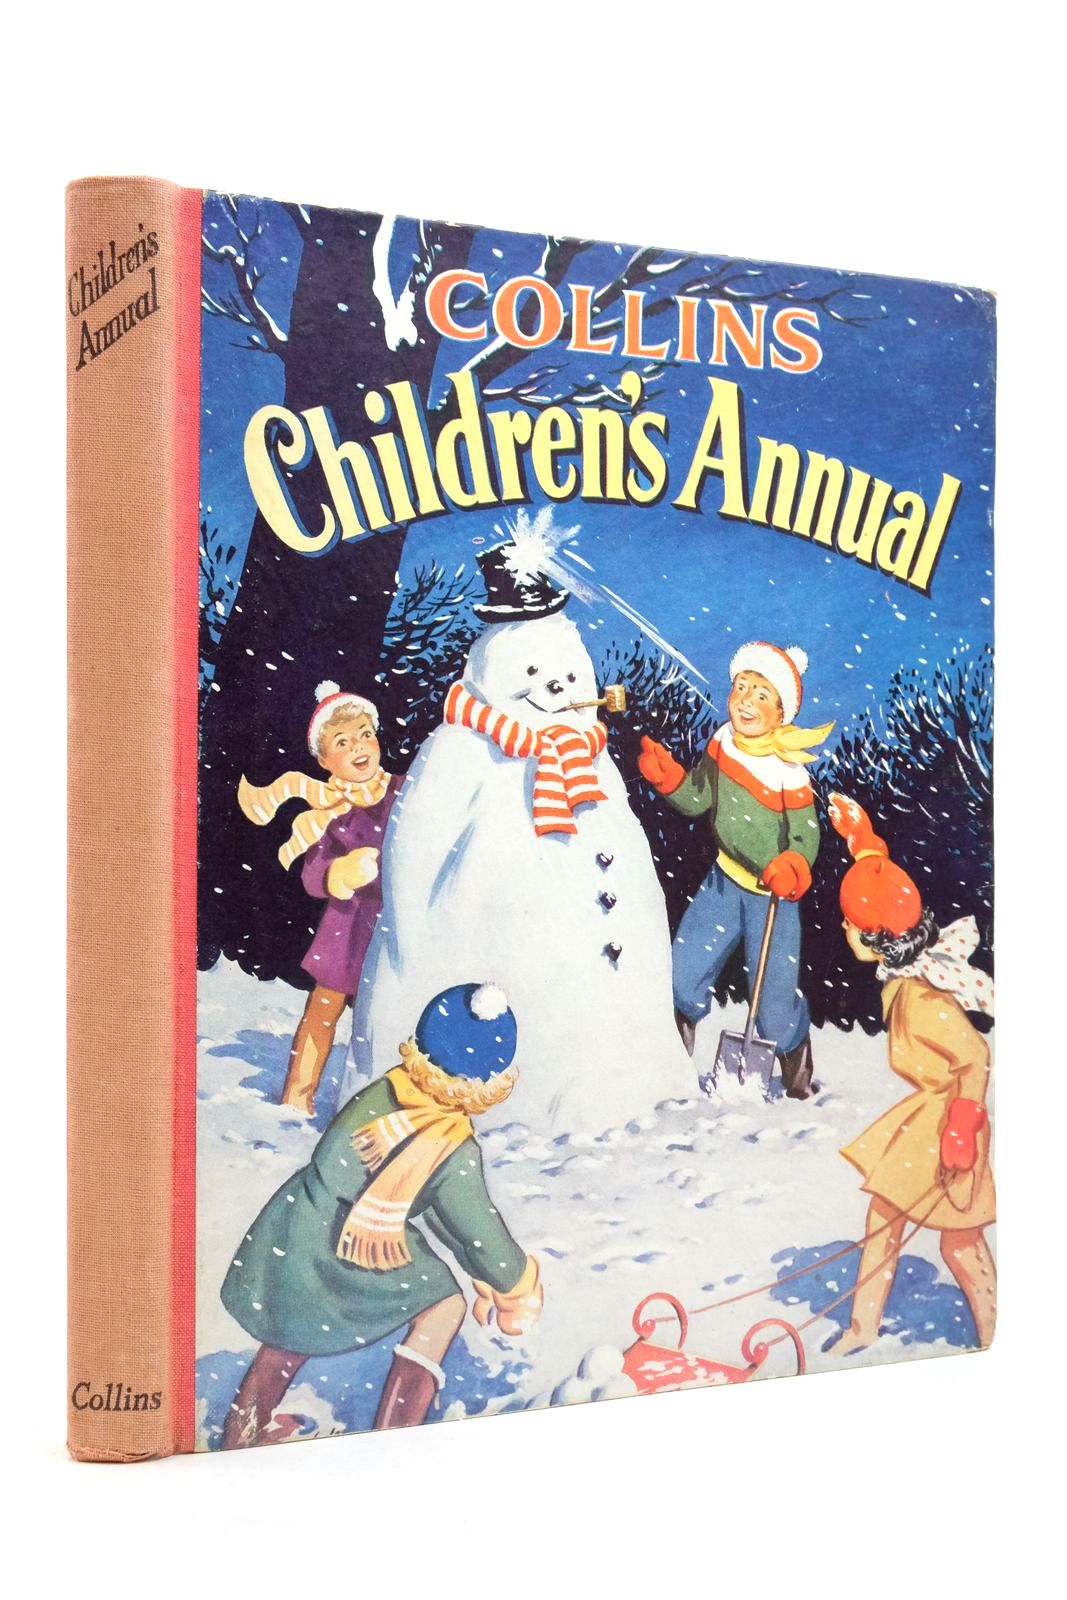 Photo of COLLINS CHILDREN'S ANNUAL written by Helps, Racey Chappell, Mollie et al,  illustrated by Heap, Jean Walmsley Boswell, Hilda Helps, Racey et al.,  published by Collins (STOCK CODE: 2138898)  for sale by Stella & Rose's Books